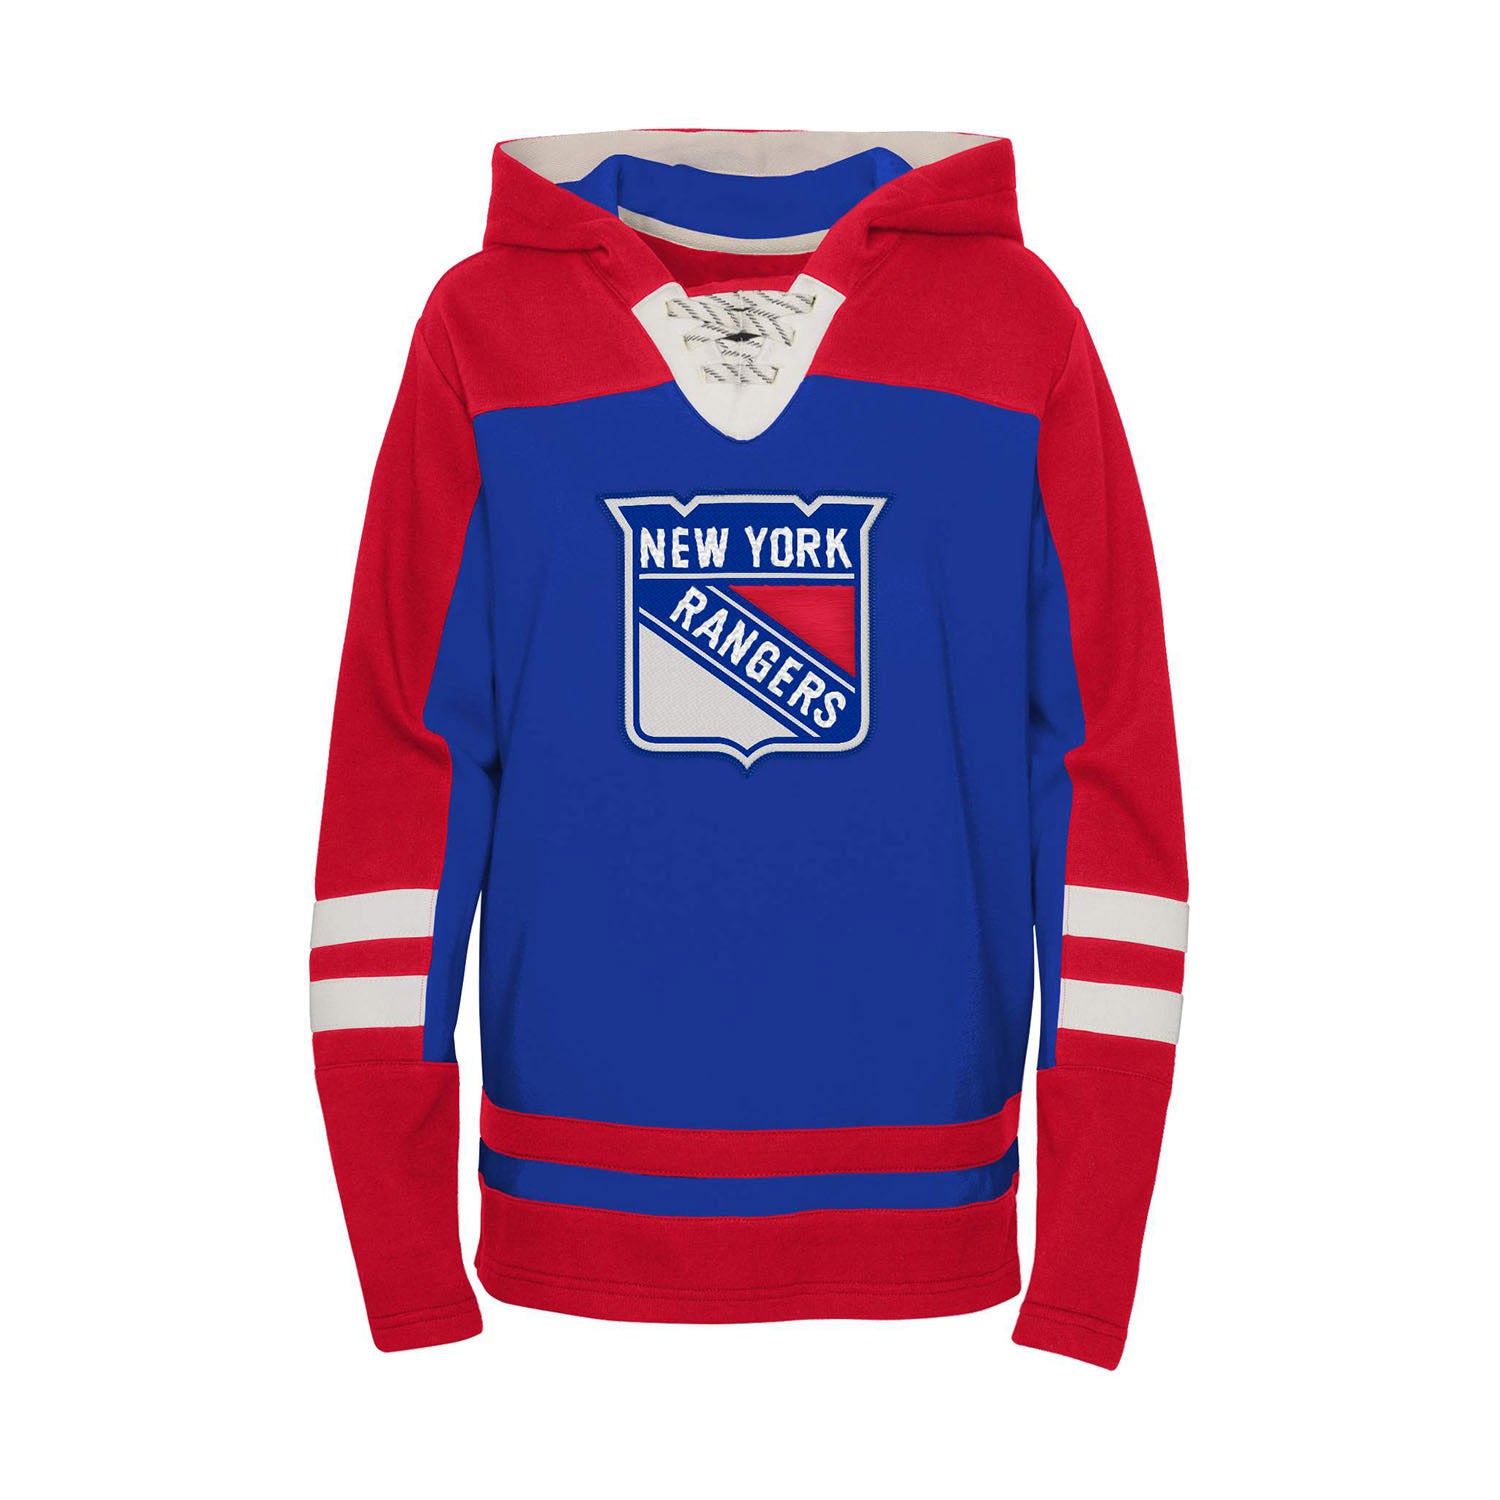 New York Rangers Ageless Revisited Pullover Hockey Hoodie - Youth